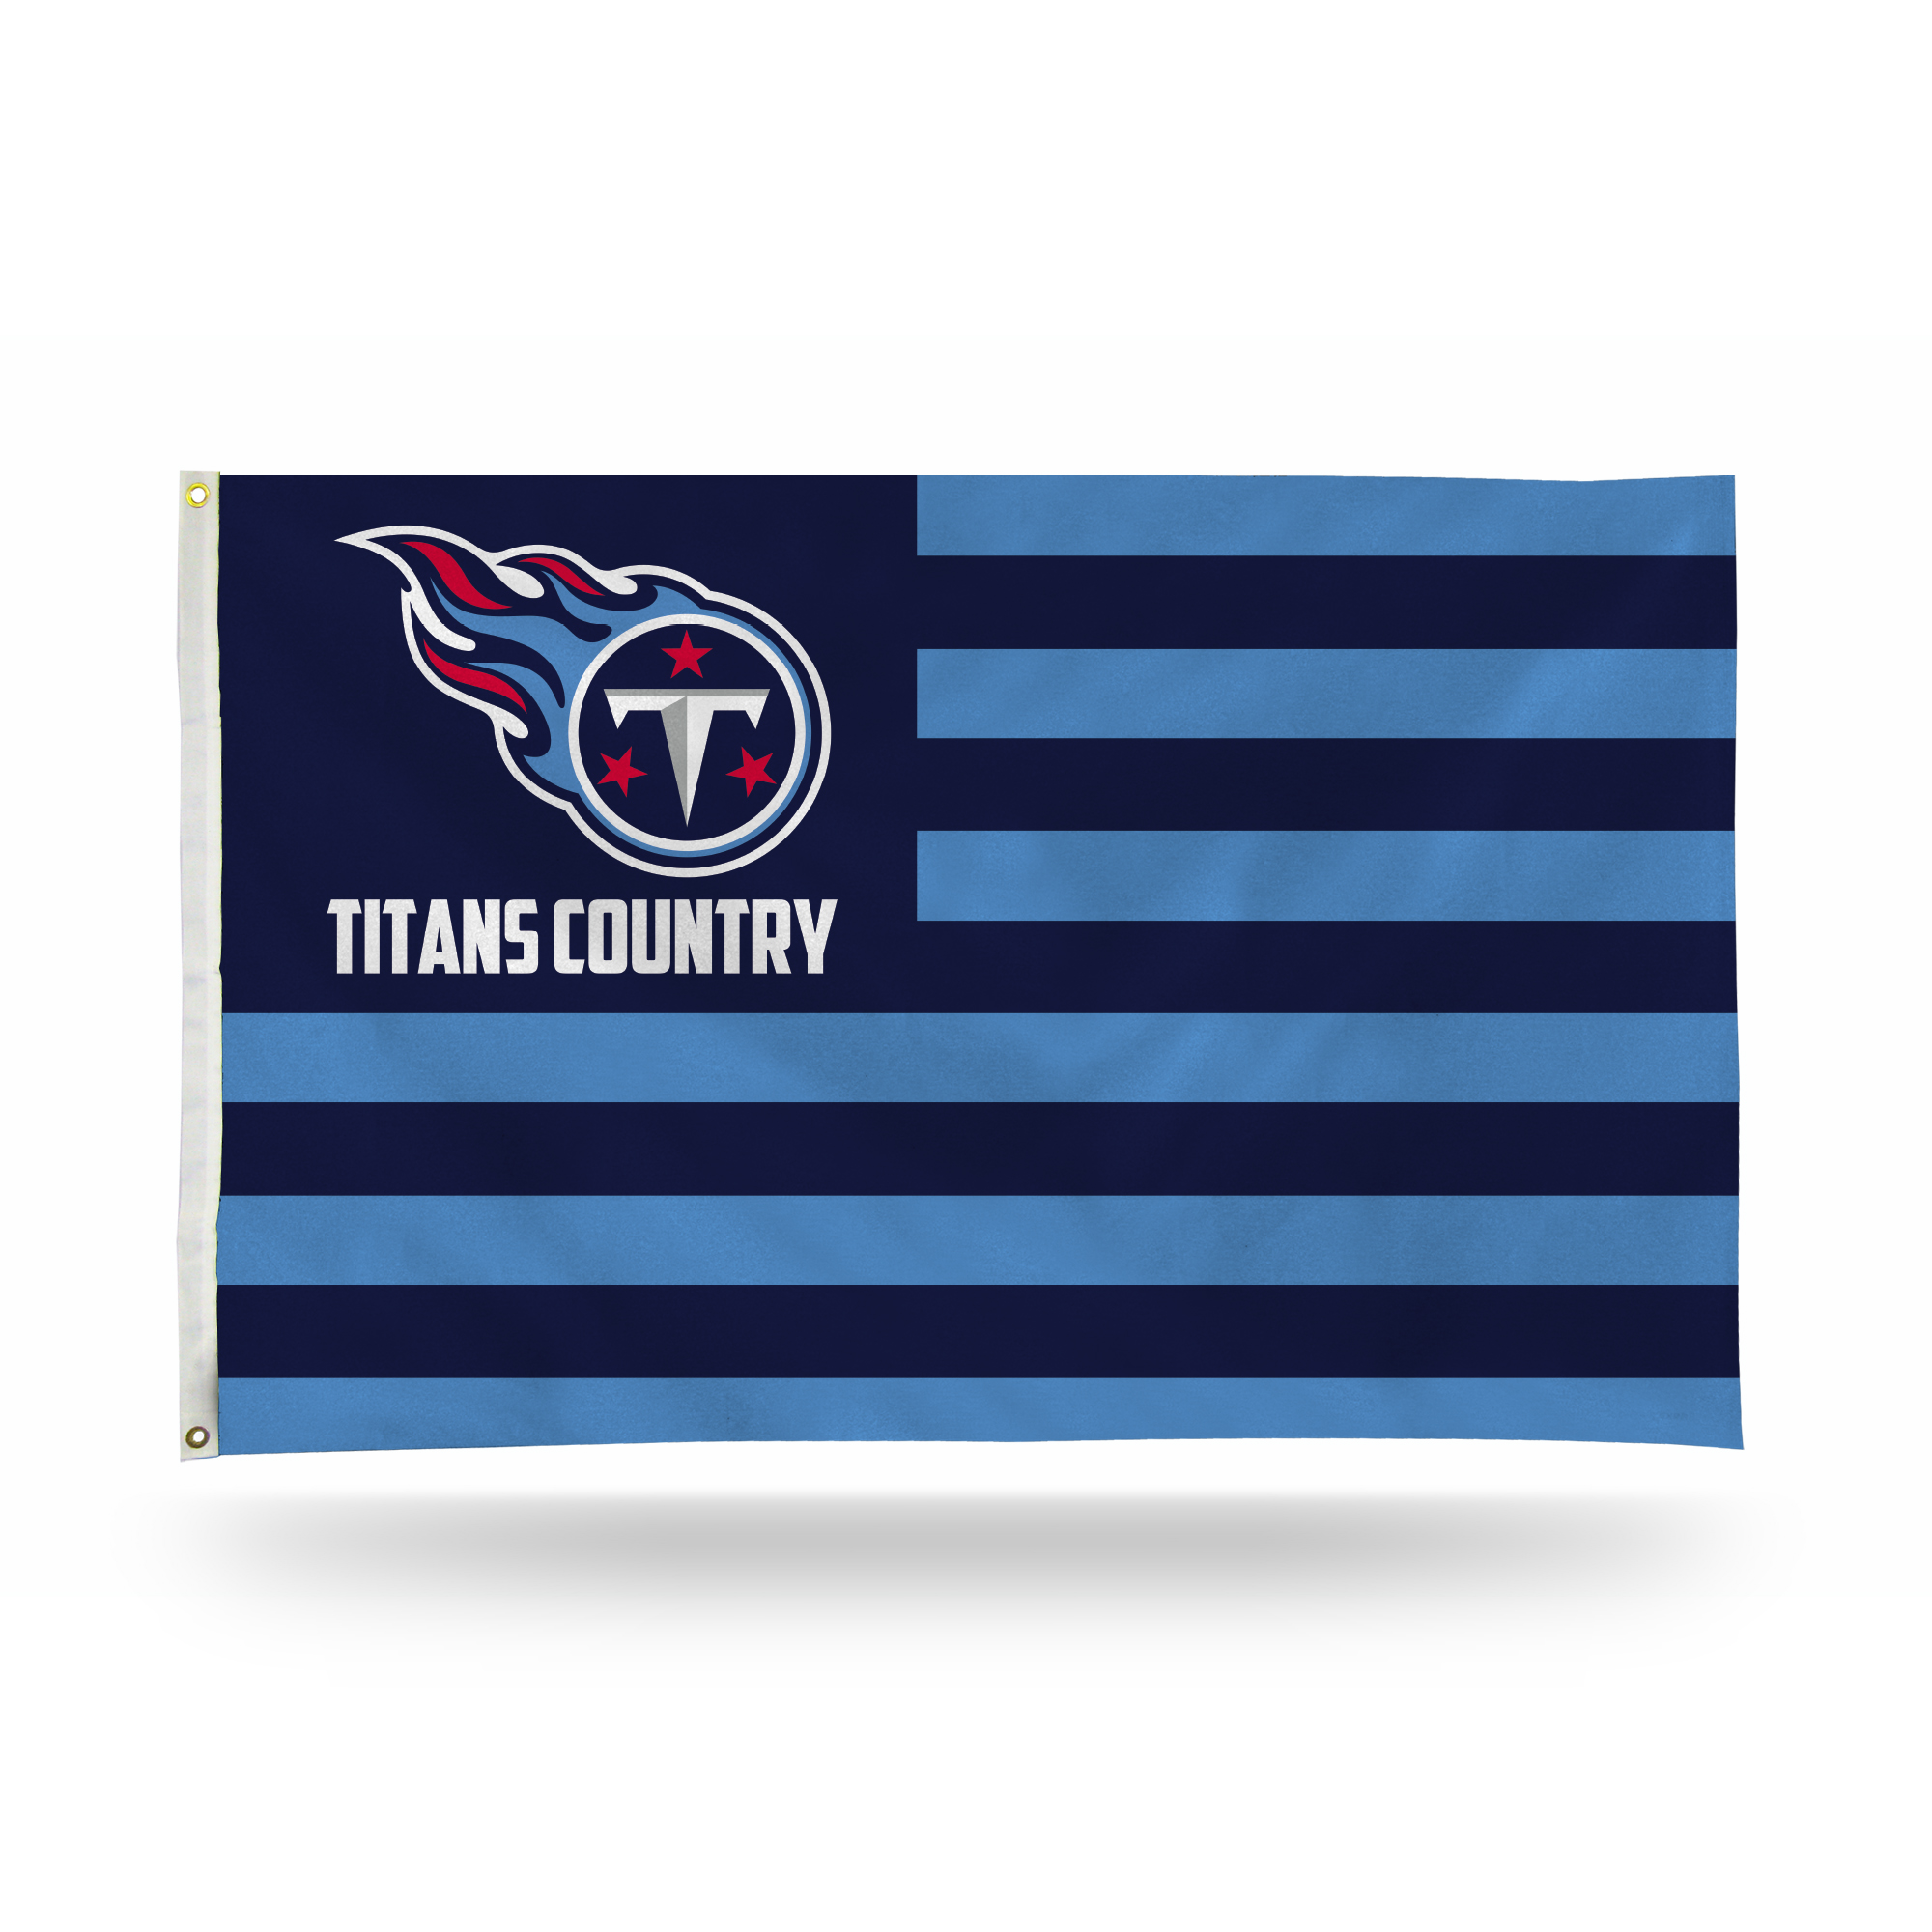 Rico Industries NFL Football Tennessee Titans Country 3' x 5' Banner Flag